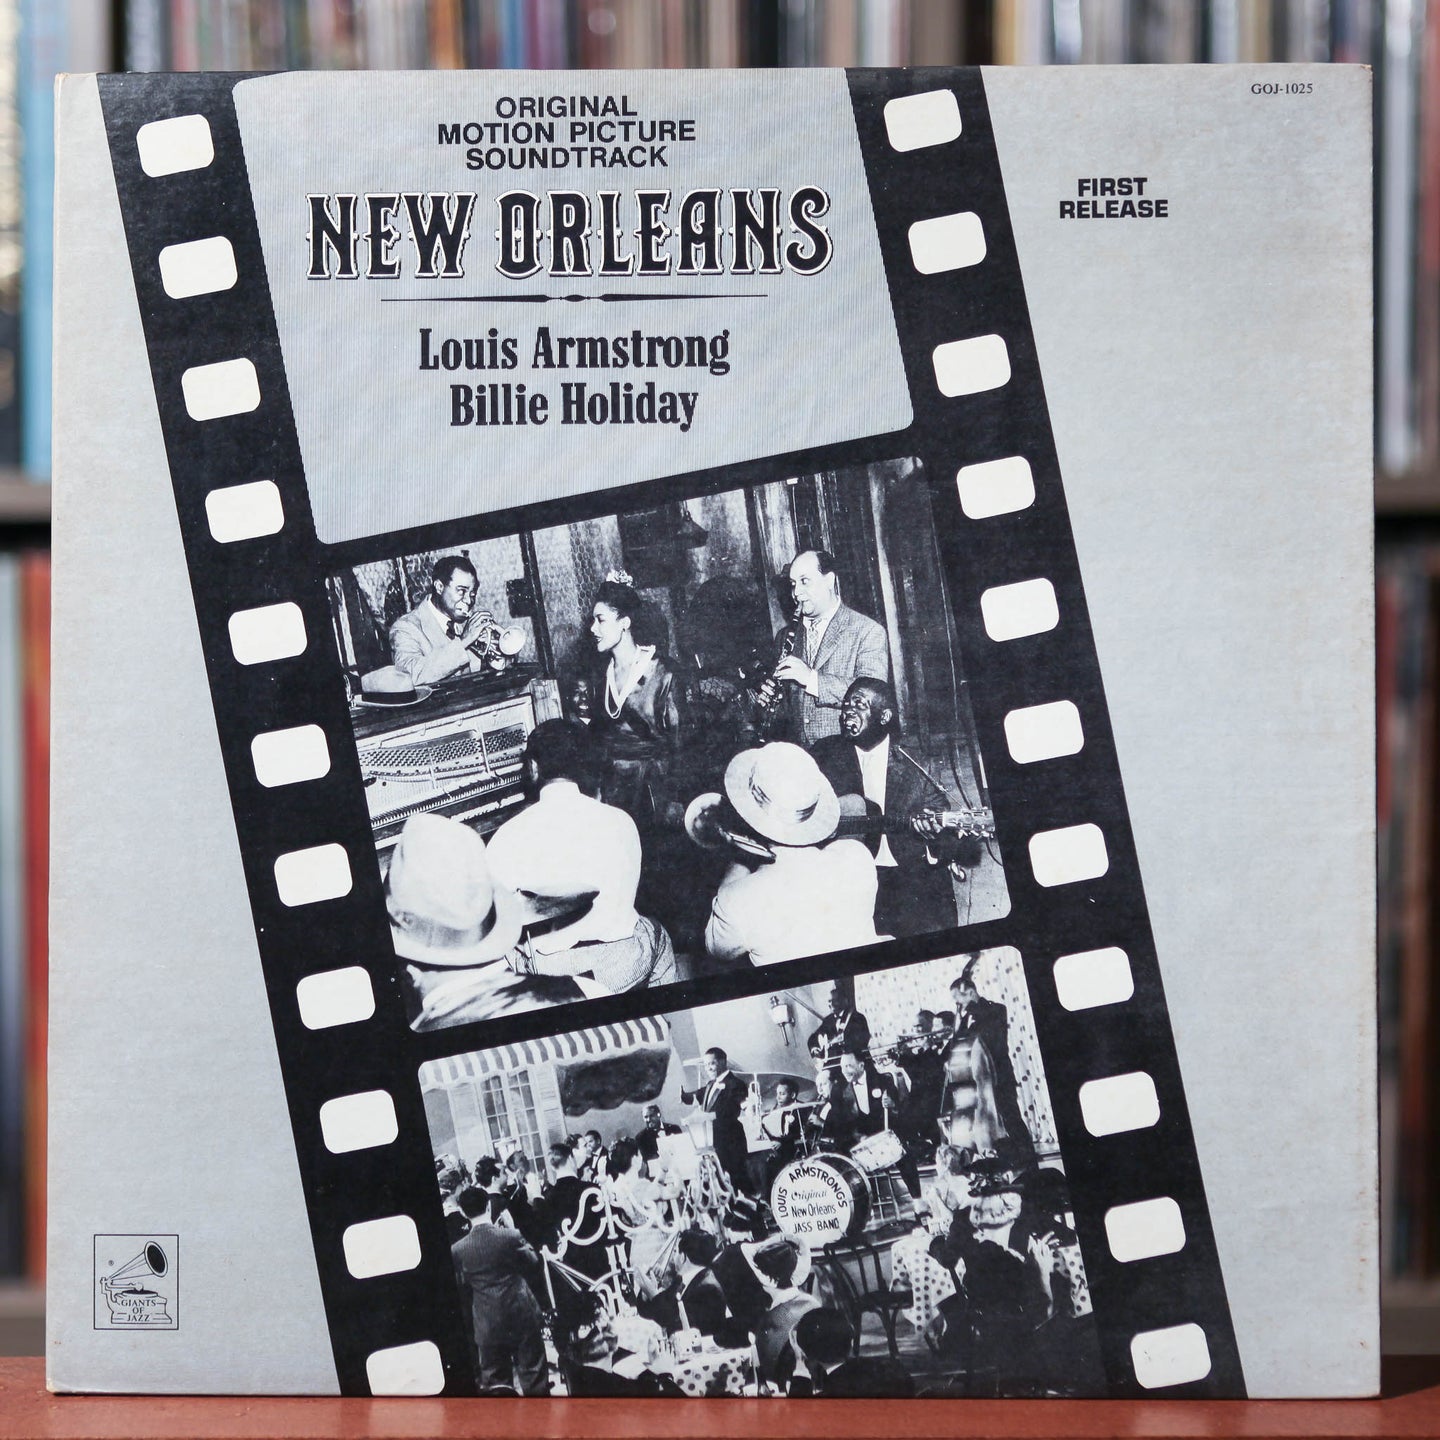 Louis Armstrong, Billie Holiday - New Orleans Original Motion Picture Soundtrack - 1982 Giants Of Jazz, EX/VG+